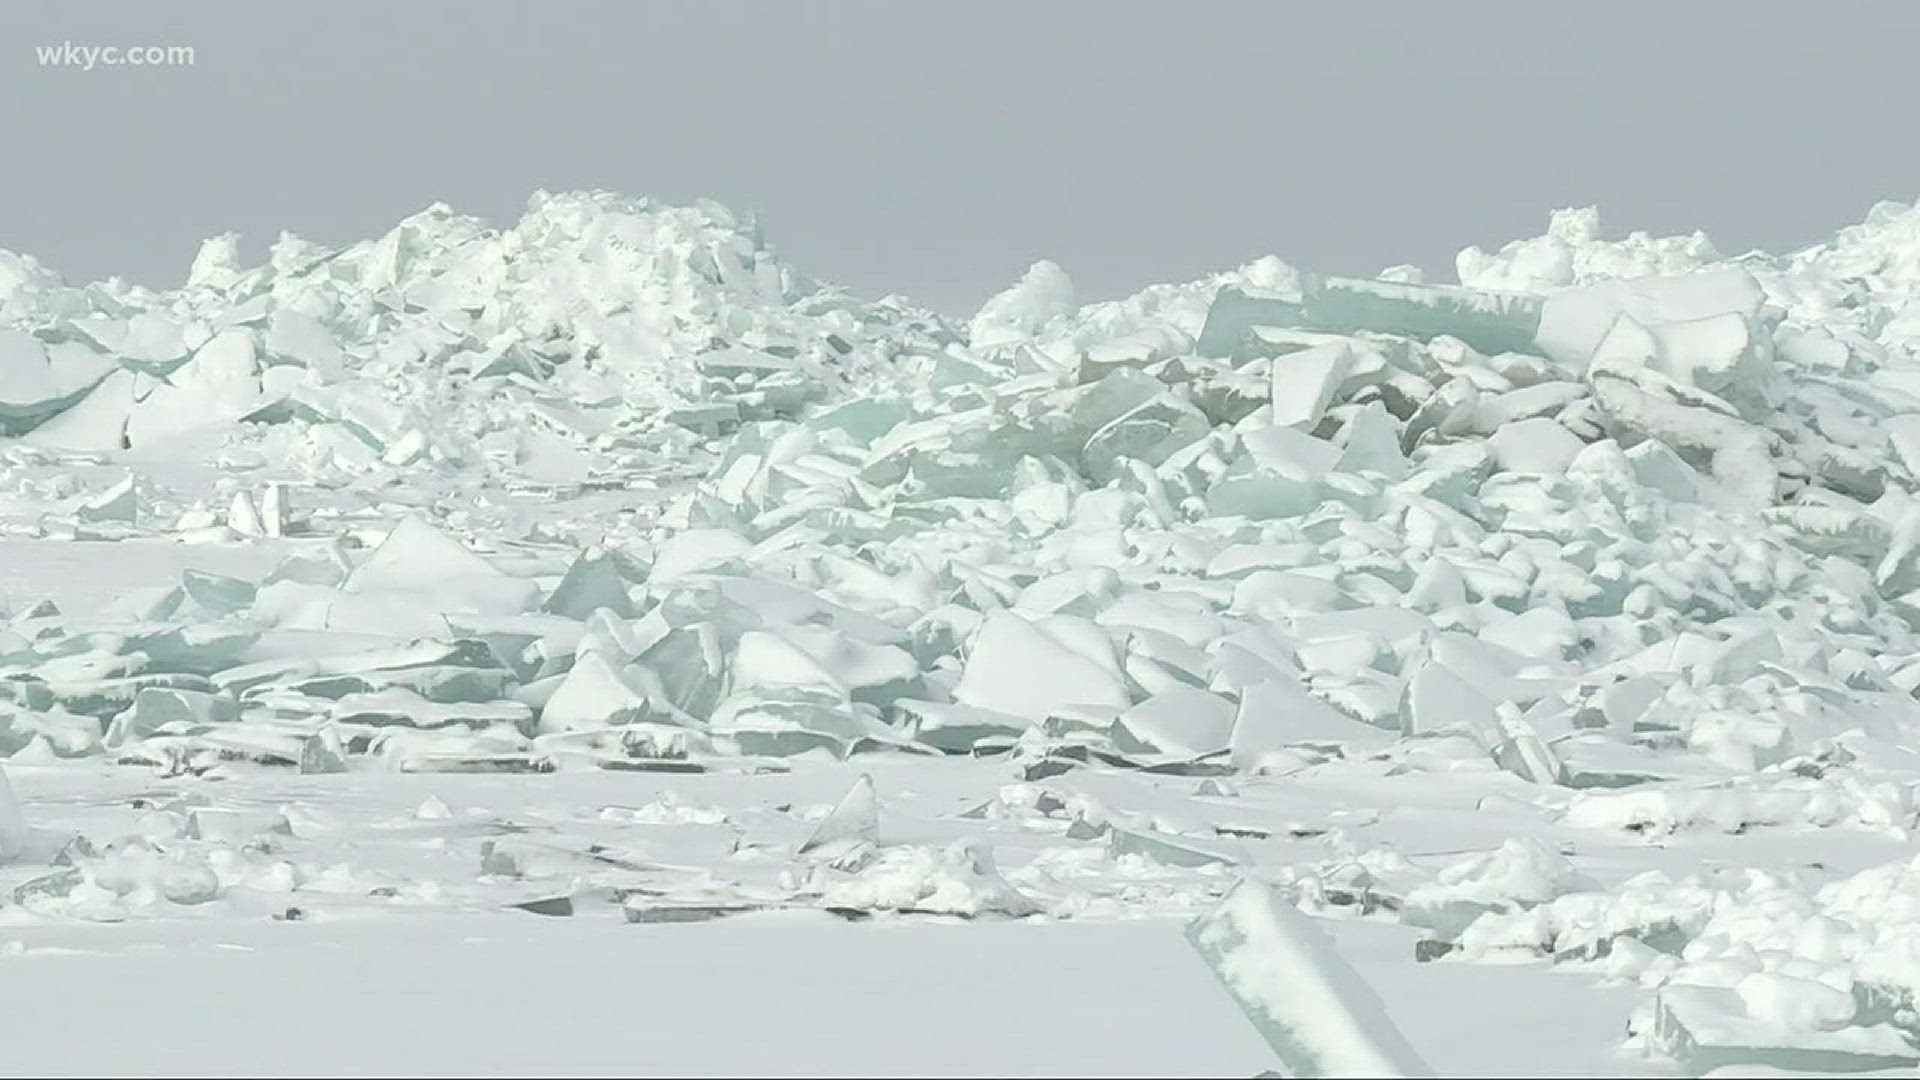 Ice mountains draw crowds to Lake Erie